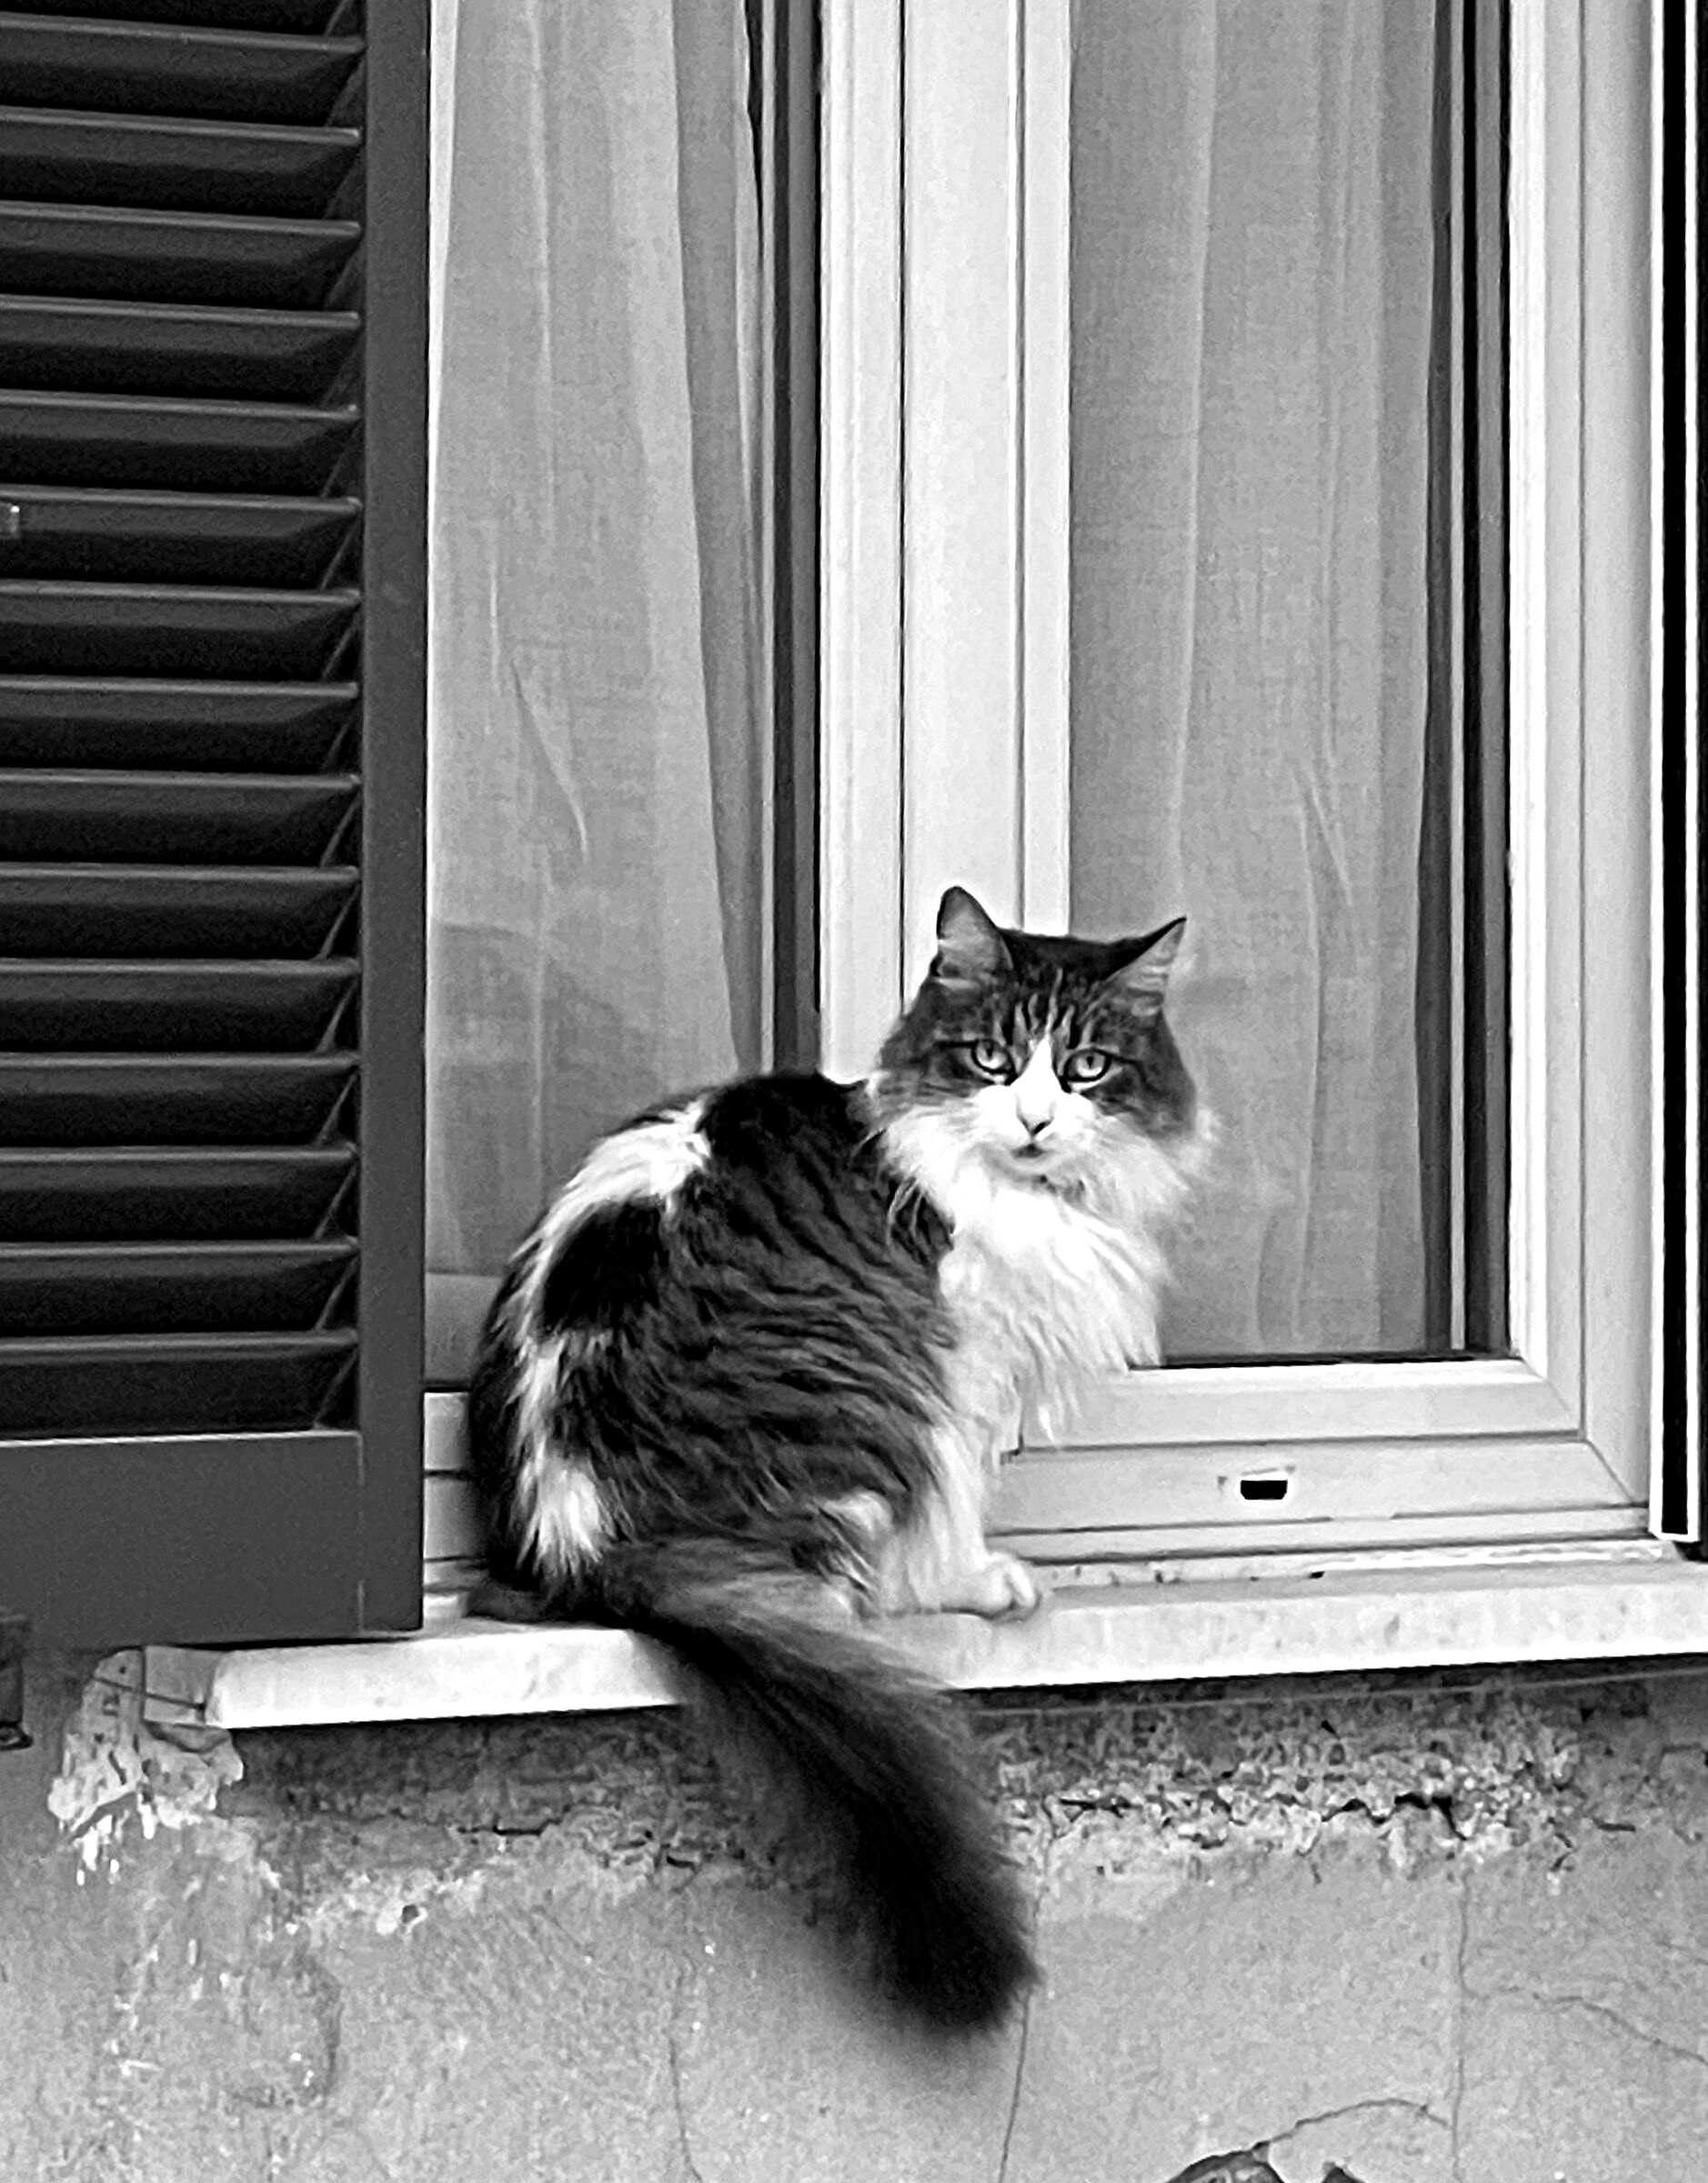 At the window...